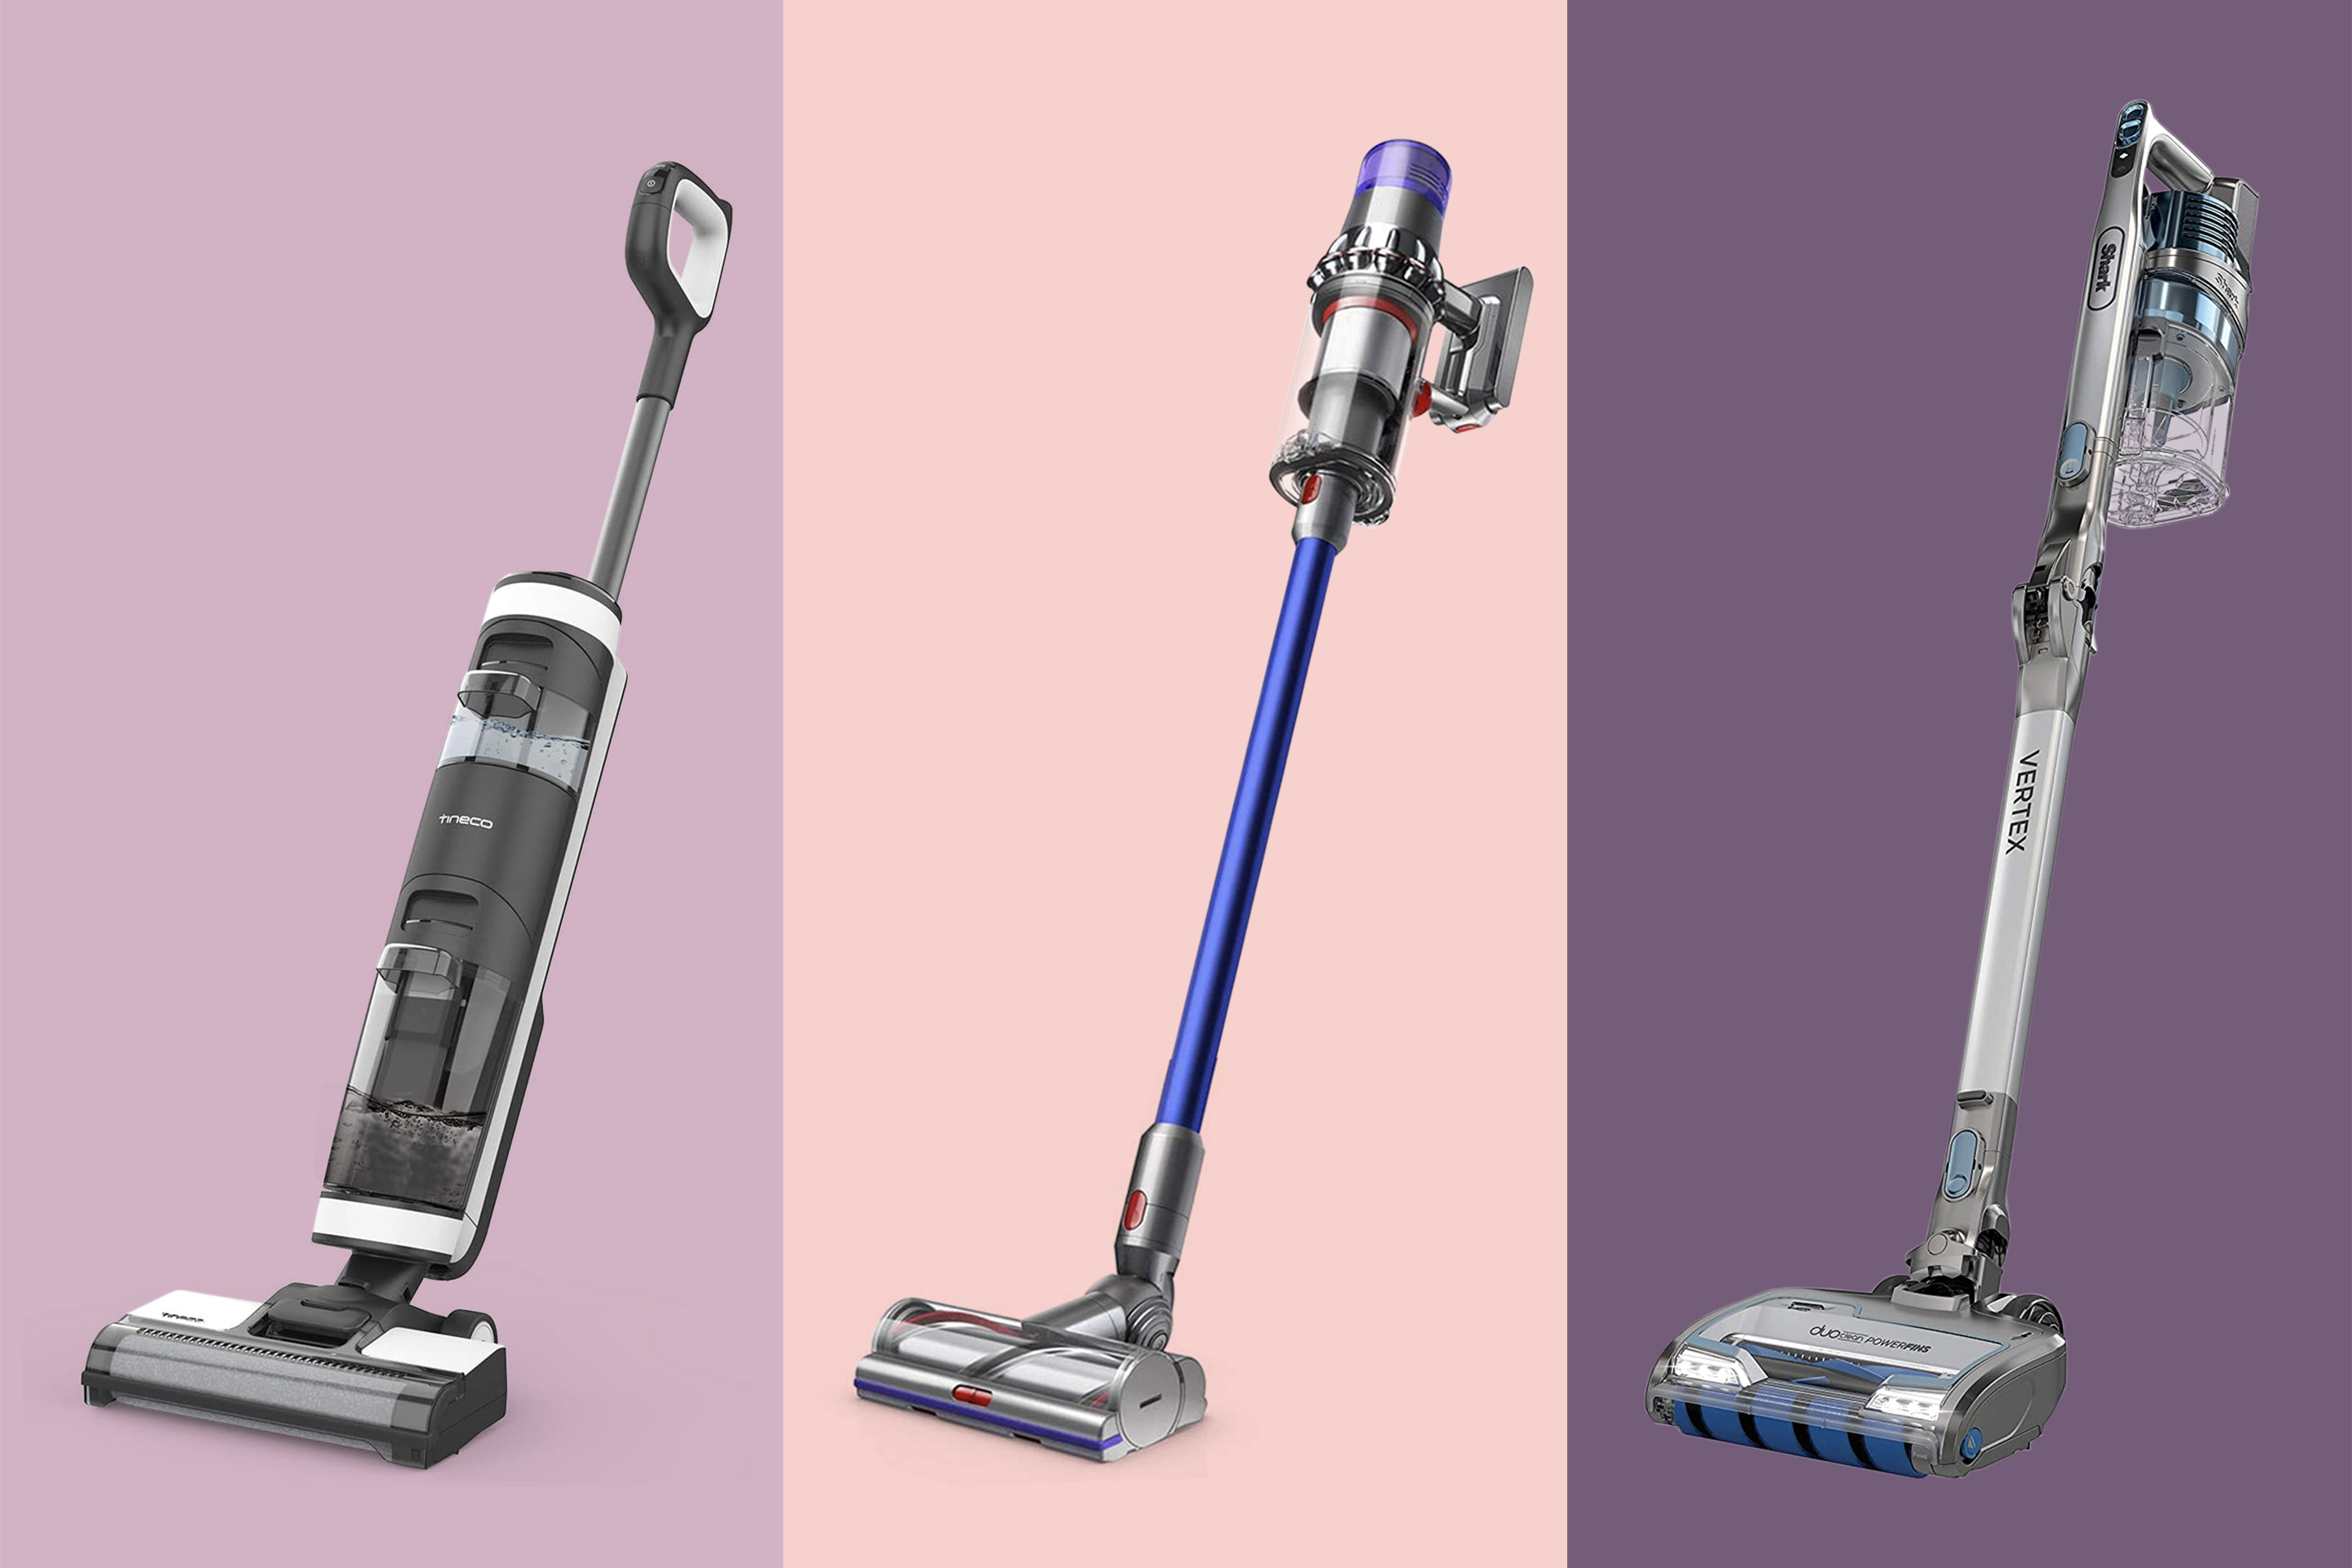 Best Cordless Vacuum Cleaner For 2021, Vacuum Cleaner For Hardwood Floors And Carpet Reviews